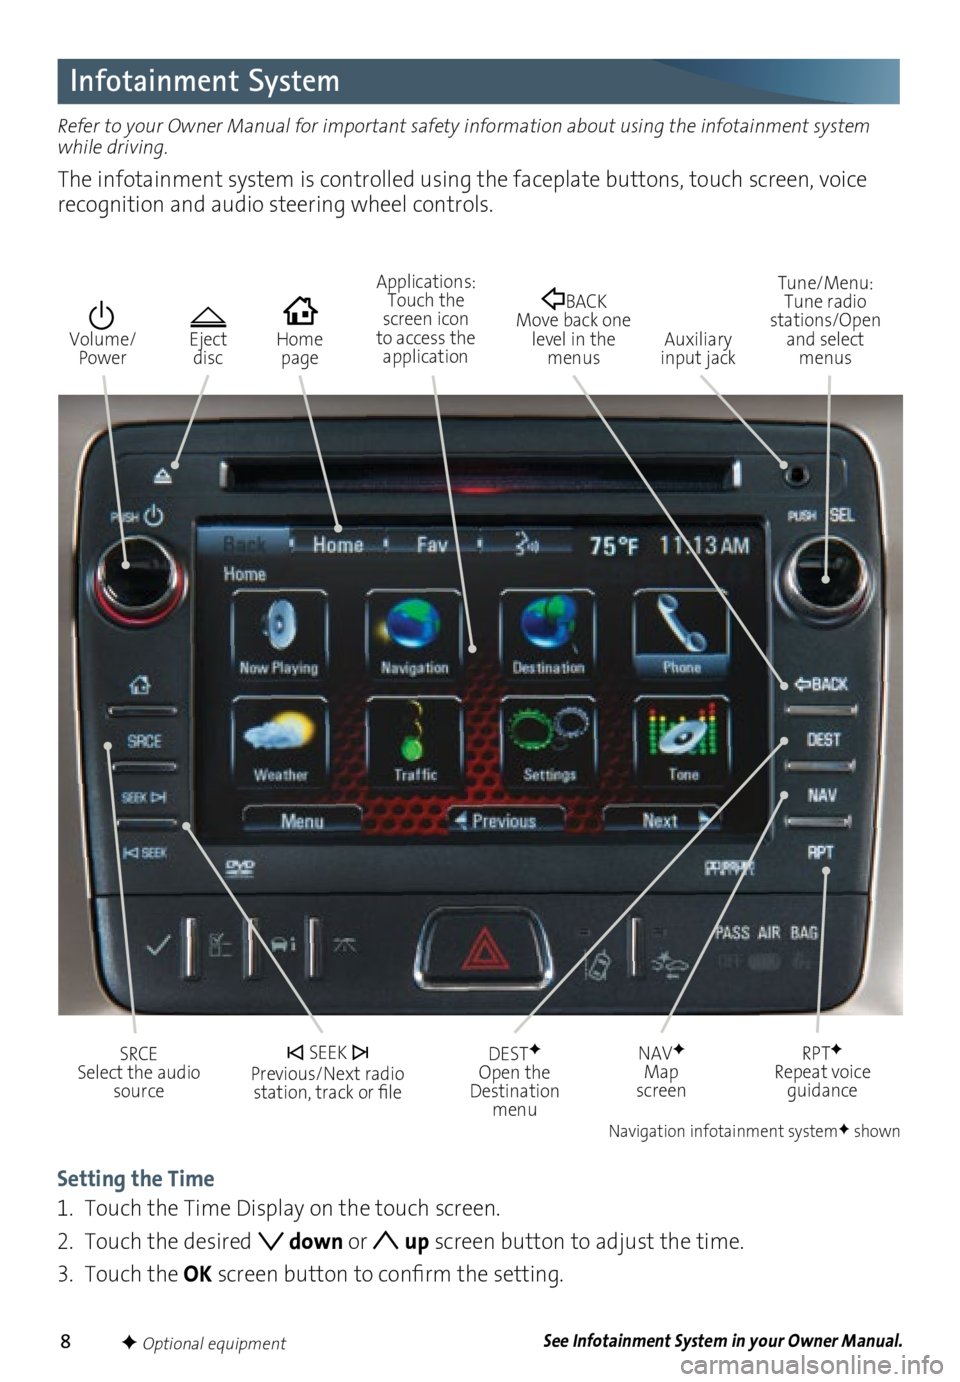 GMC ACADIA 2016  Get To Know Guide 8
Infotainment System
Refer to your Owner Manual for important safety information about using the infotainment system 
while driving. 
The infotainment system is controlled using the faceplate buttons